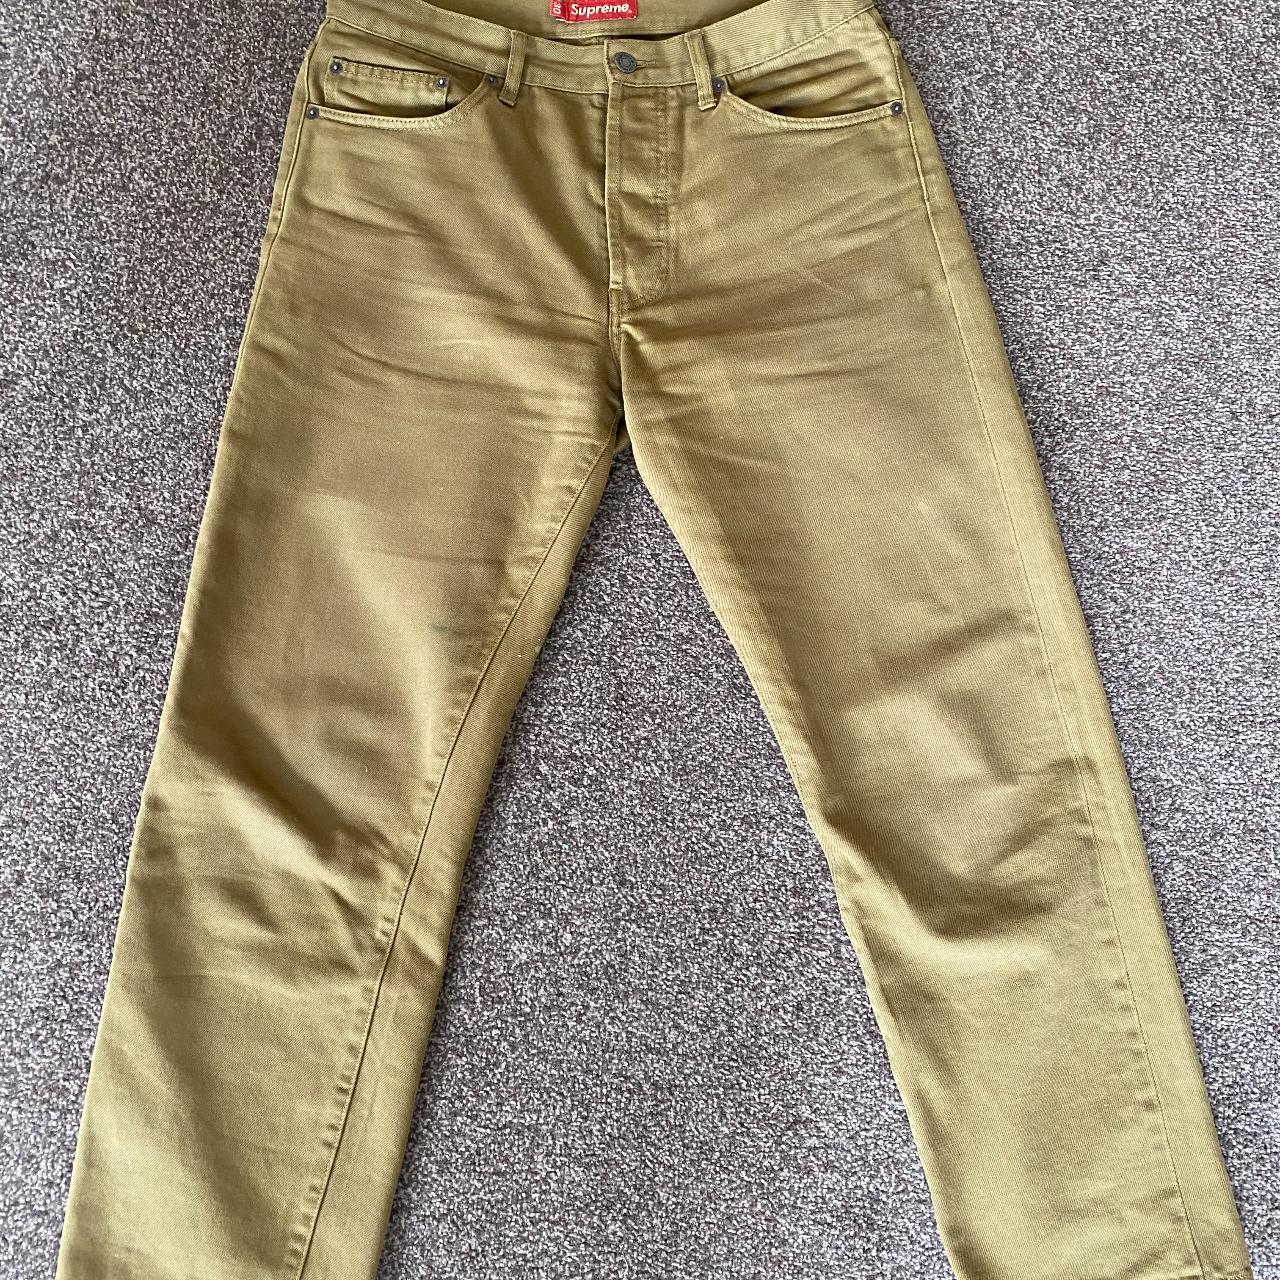 Brown supreme baggy jeans w30. Very good condition - Depop